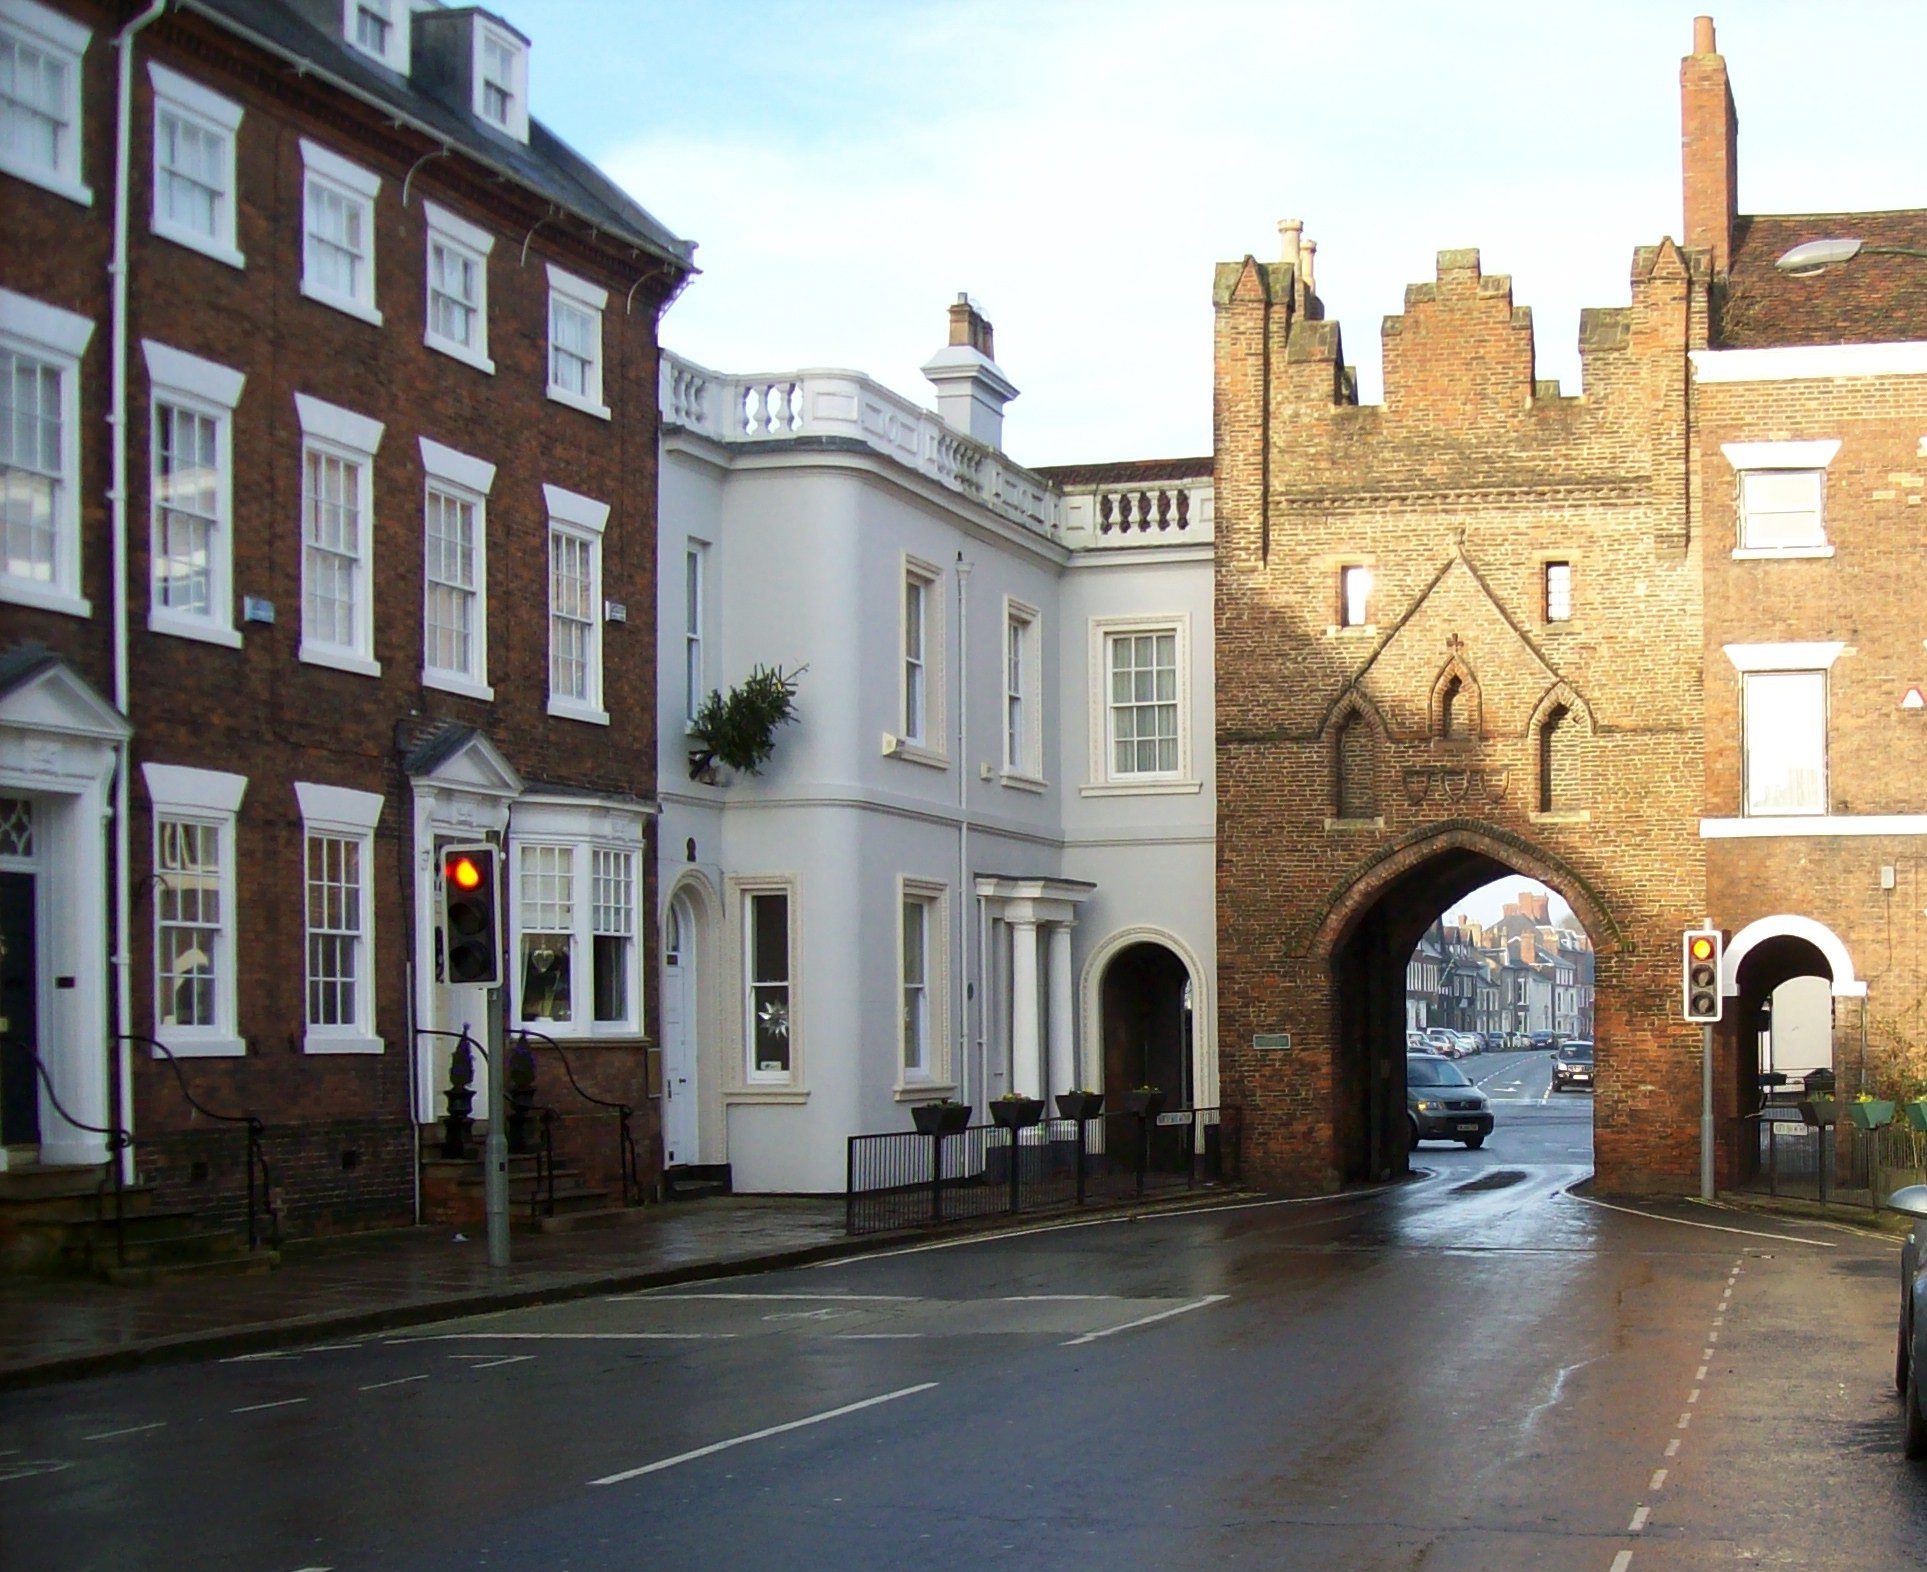 Image of North Bar Within in Beverley. Taken by summonedbyfells